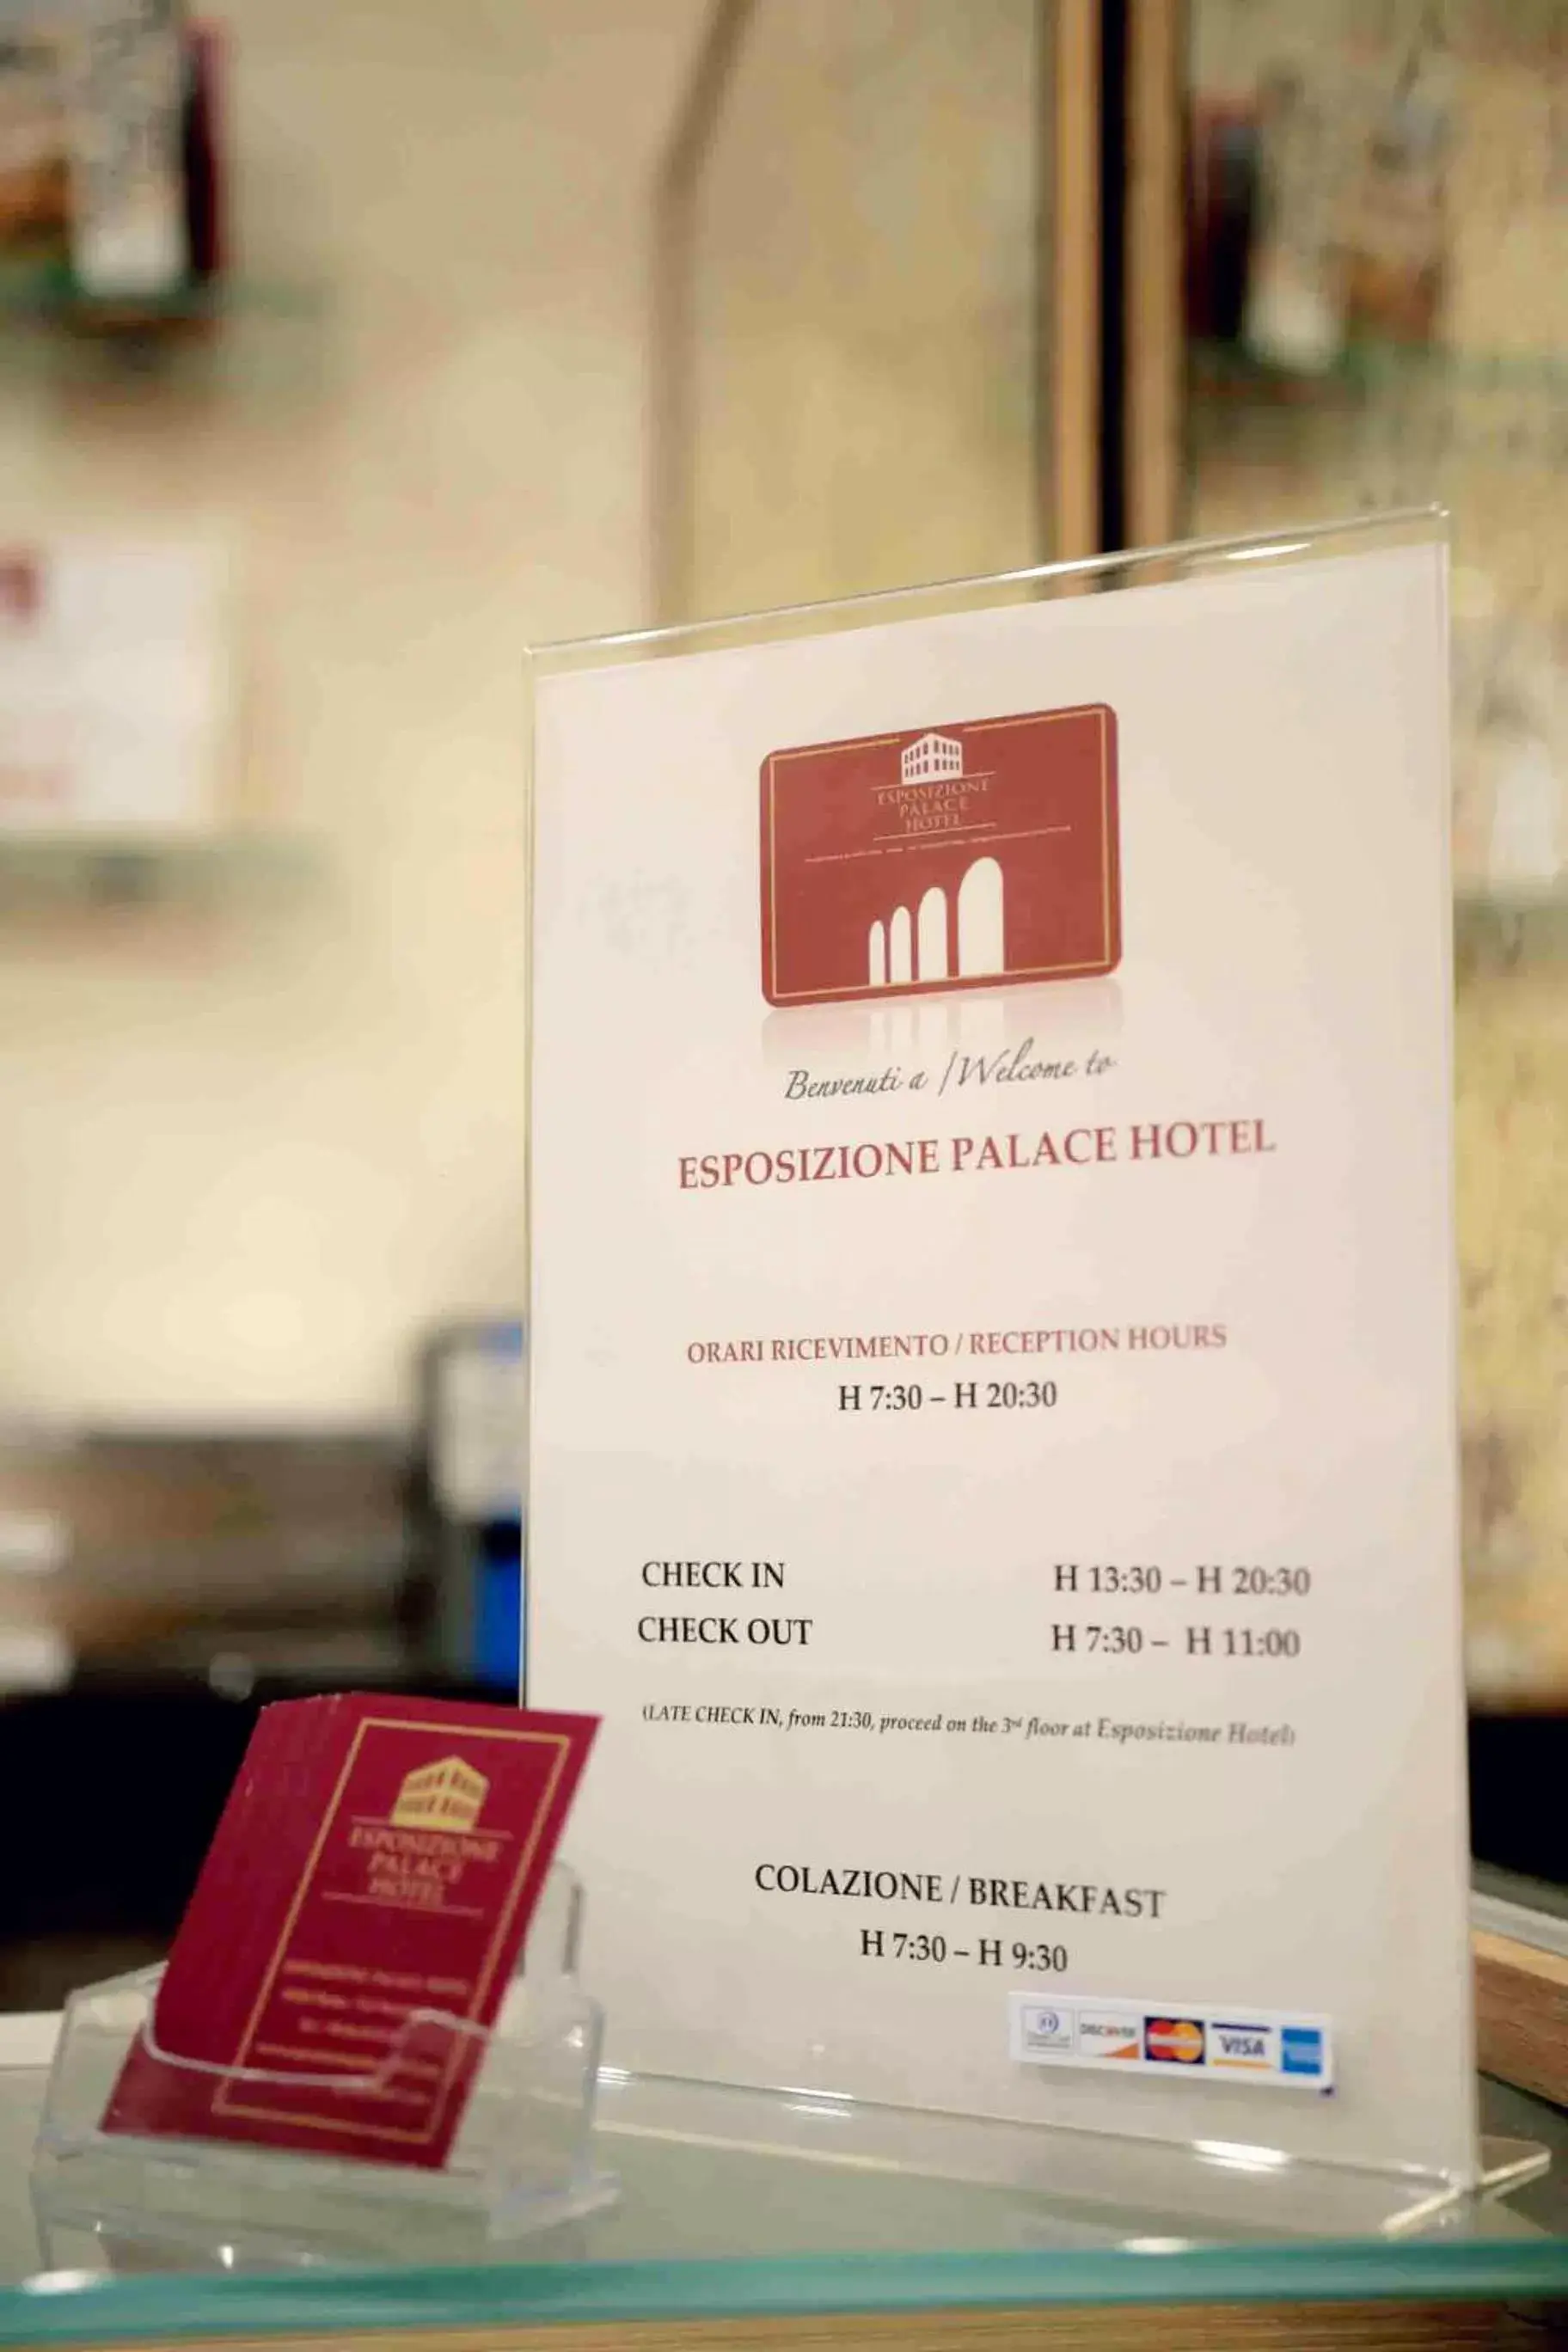 Property logo or sign in Esposizione Palace Hotel